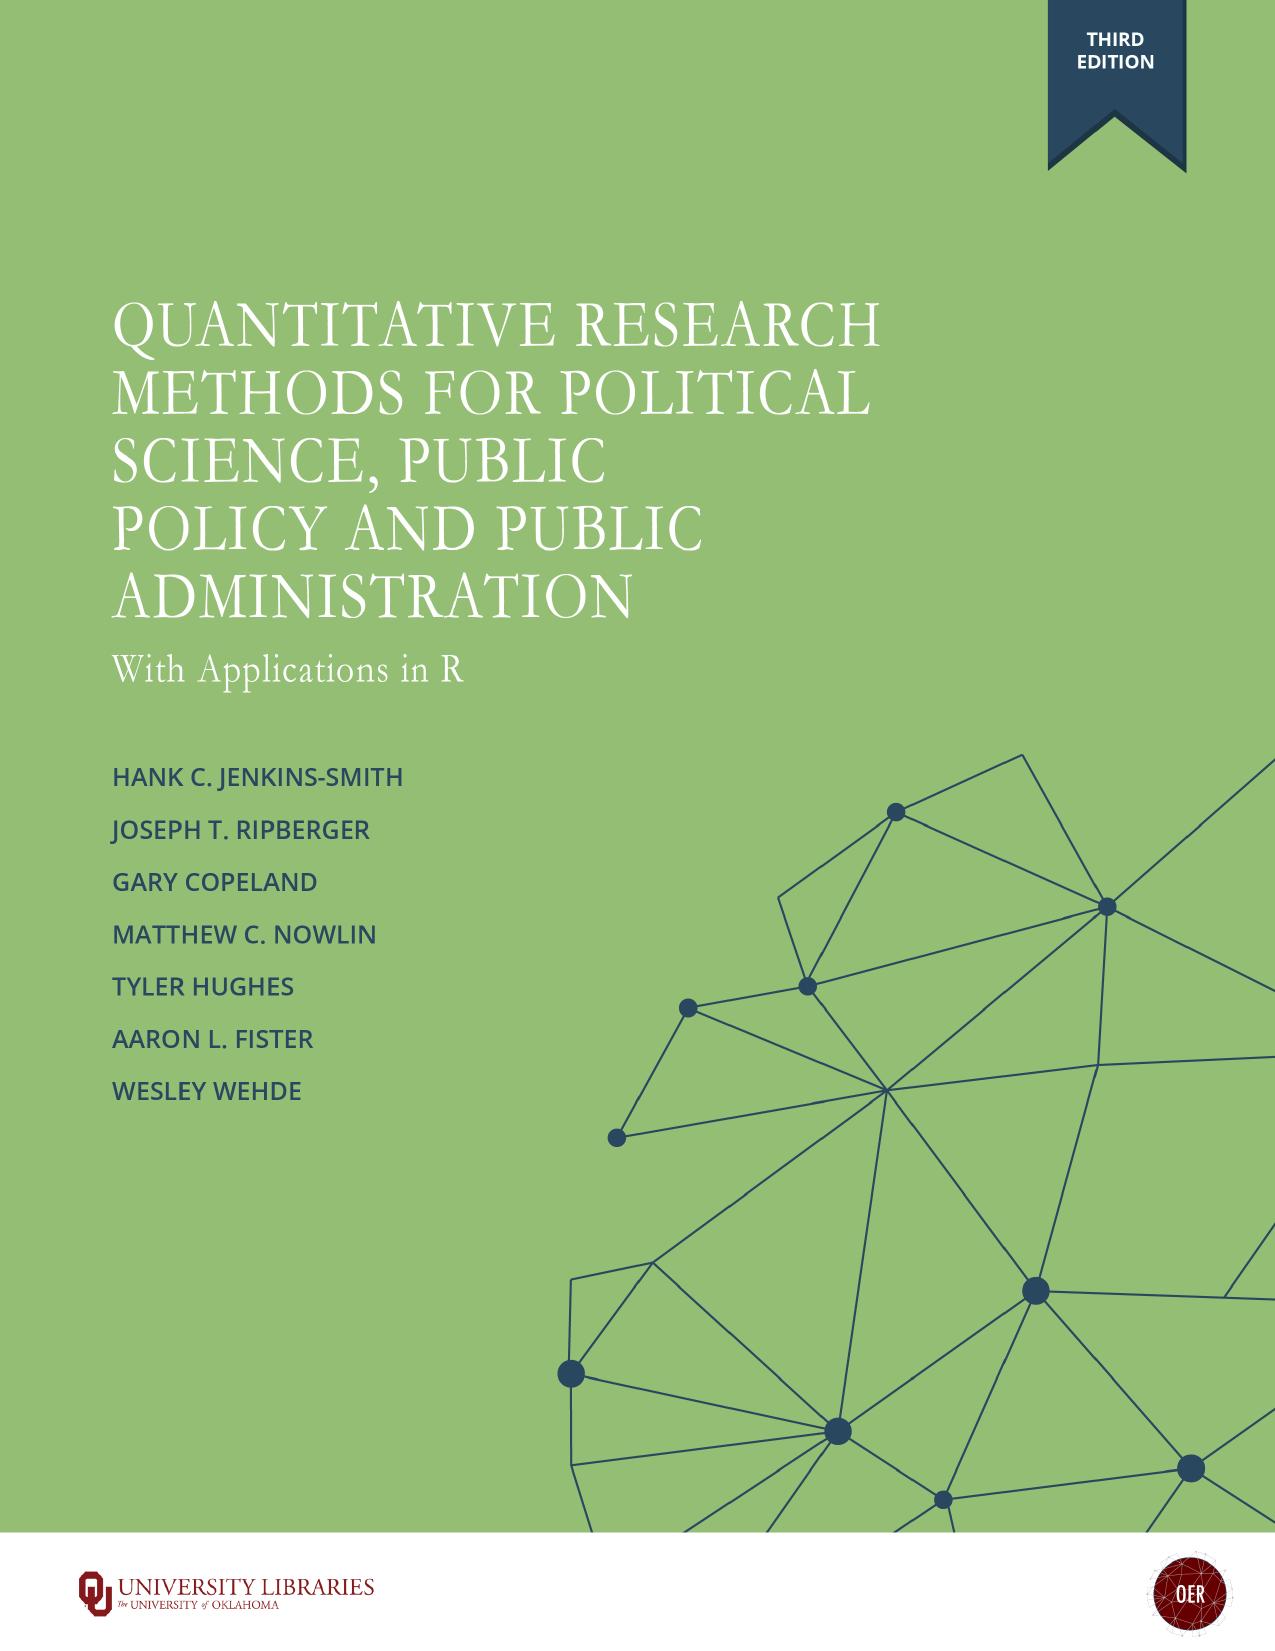 Quantitaive Research Methods For Political Science, Public Policy and Public Administration, With Applications in R (3rd Edition)